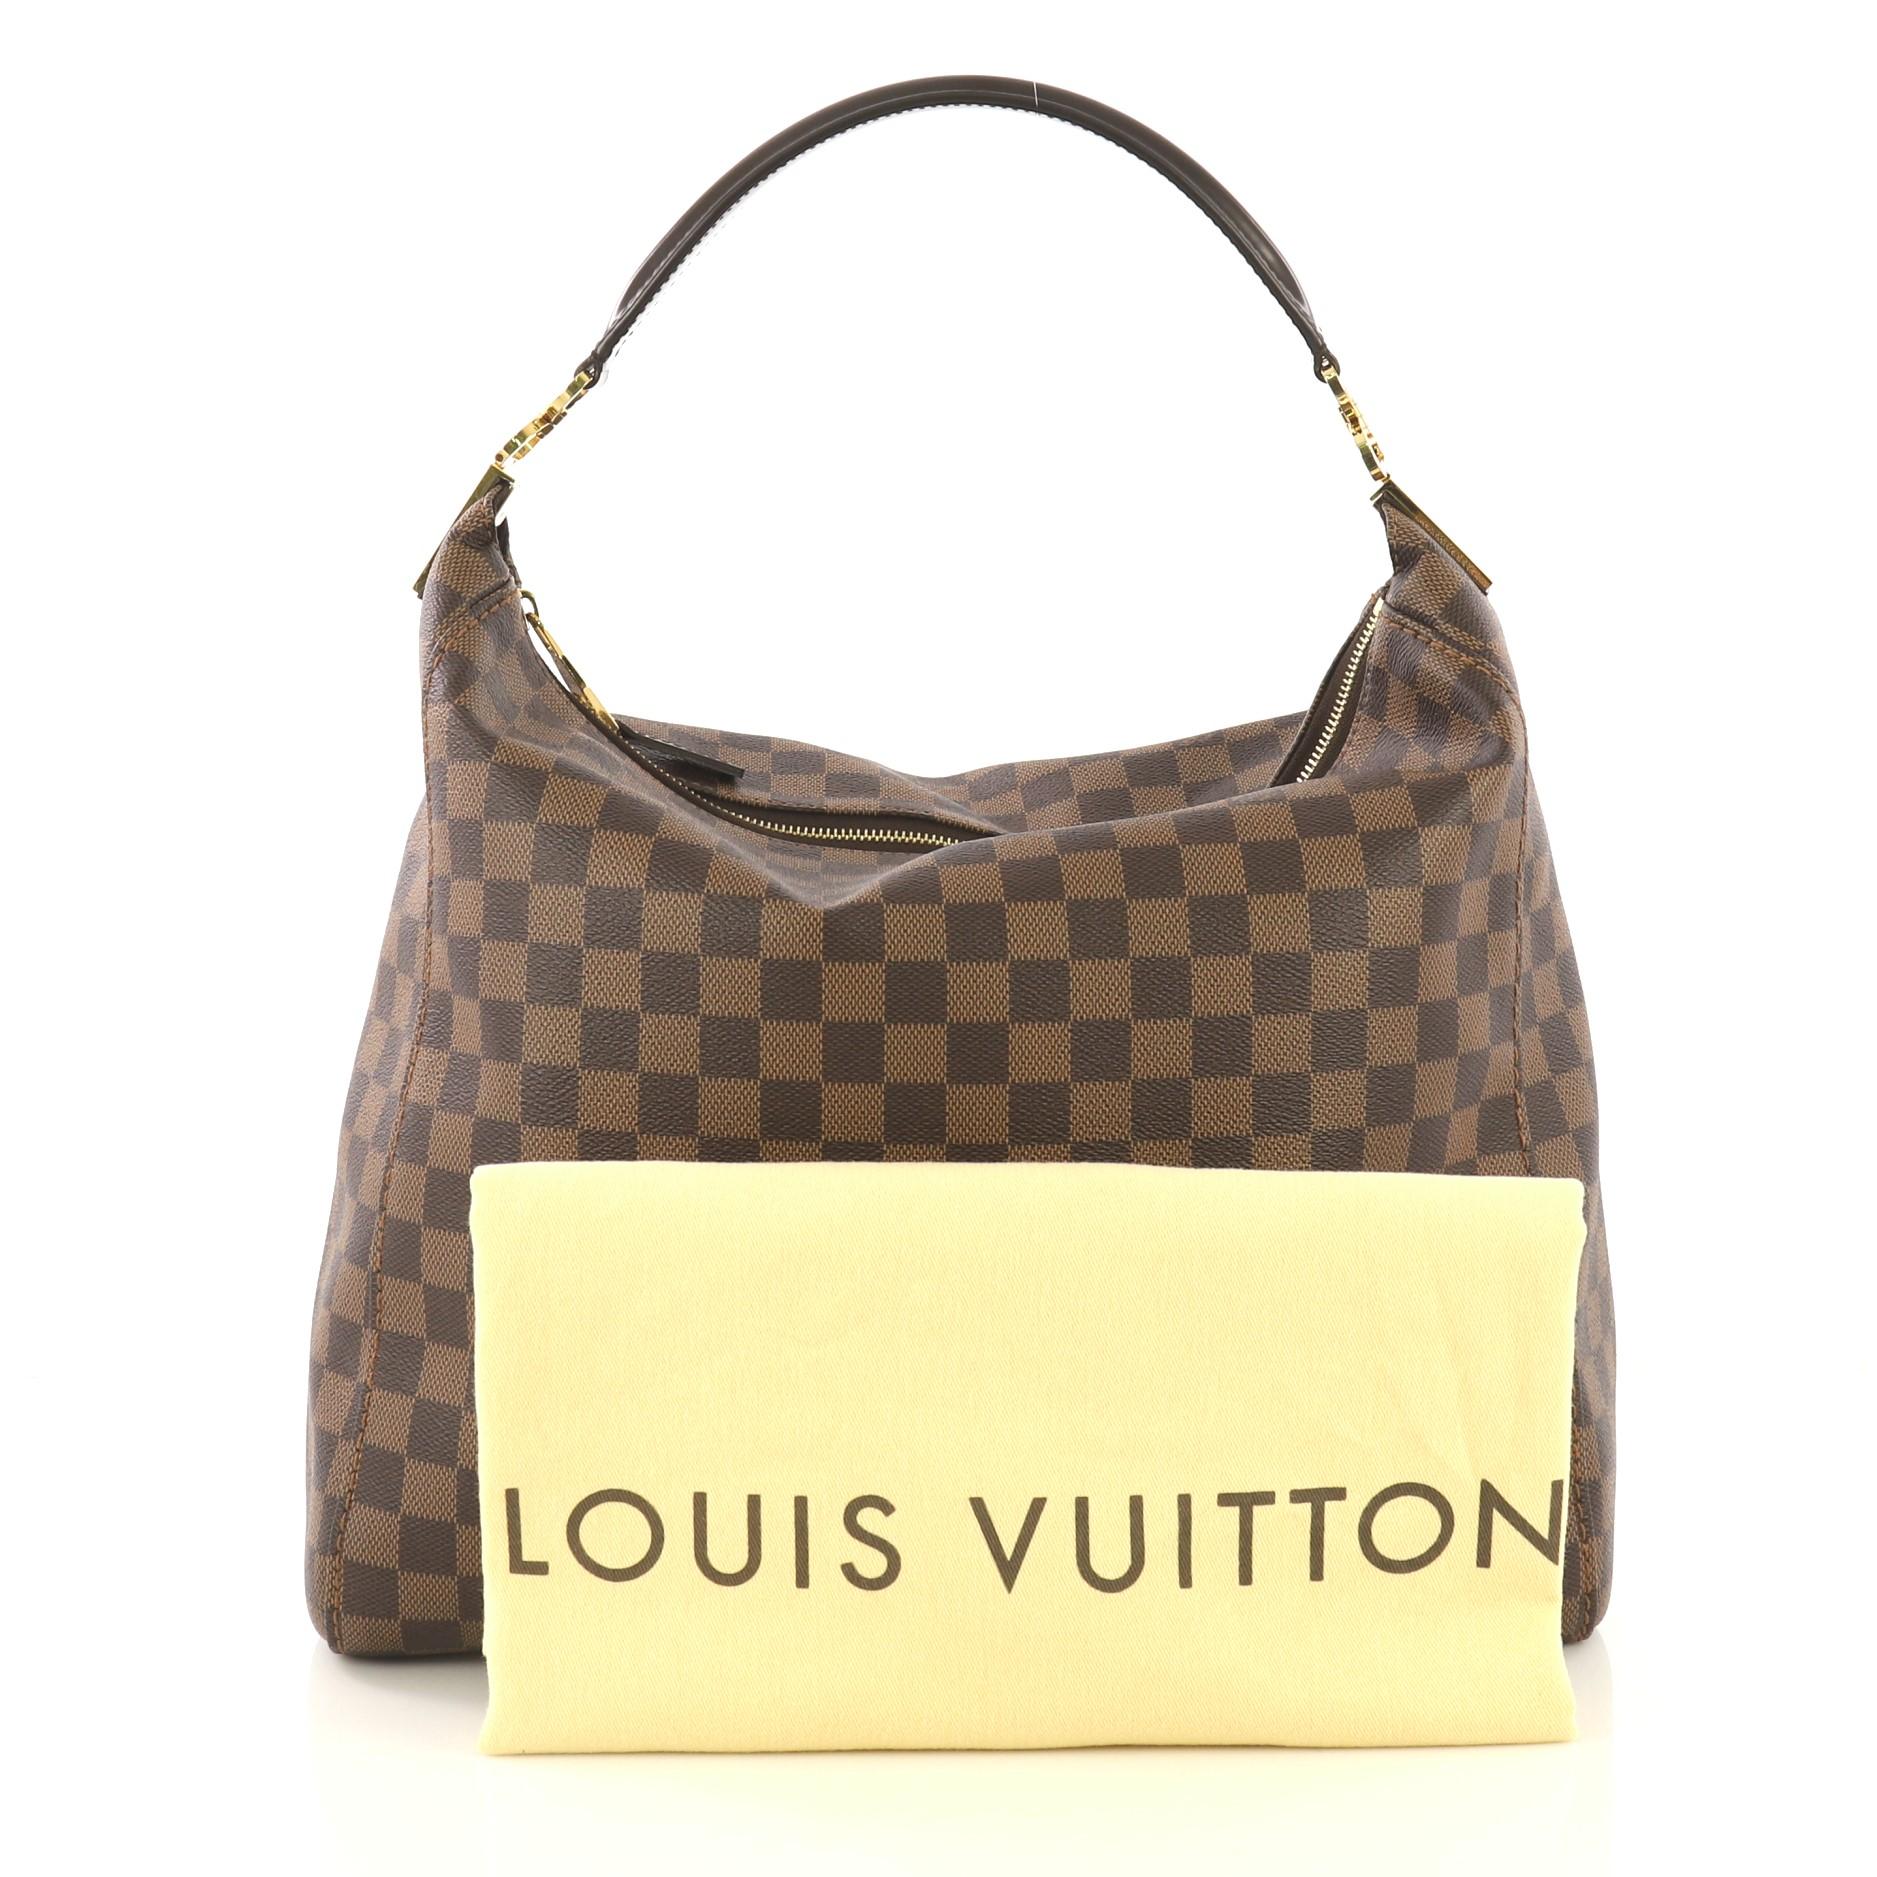 This Louis Vuitton Portobello Handbag Damier GM, crafted in damier ebene coated canvas, features single looped leather handle and gold-tone hardware. Its zip closure opens to a brown microfiber interior with side zip and slip pockets. Authenticity